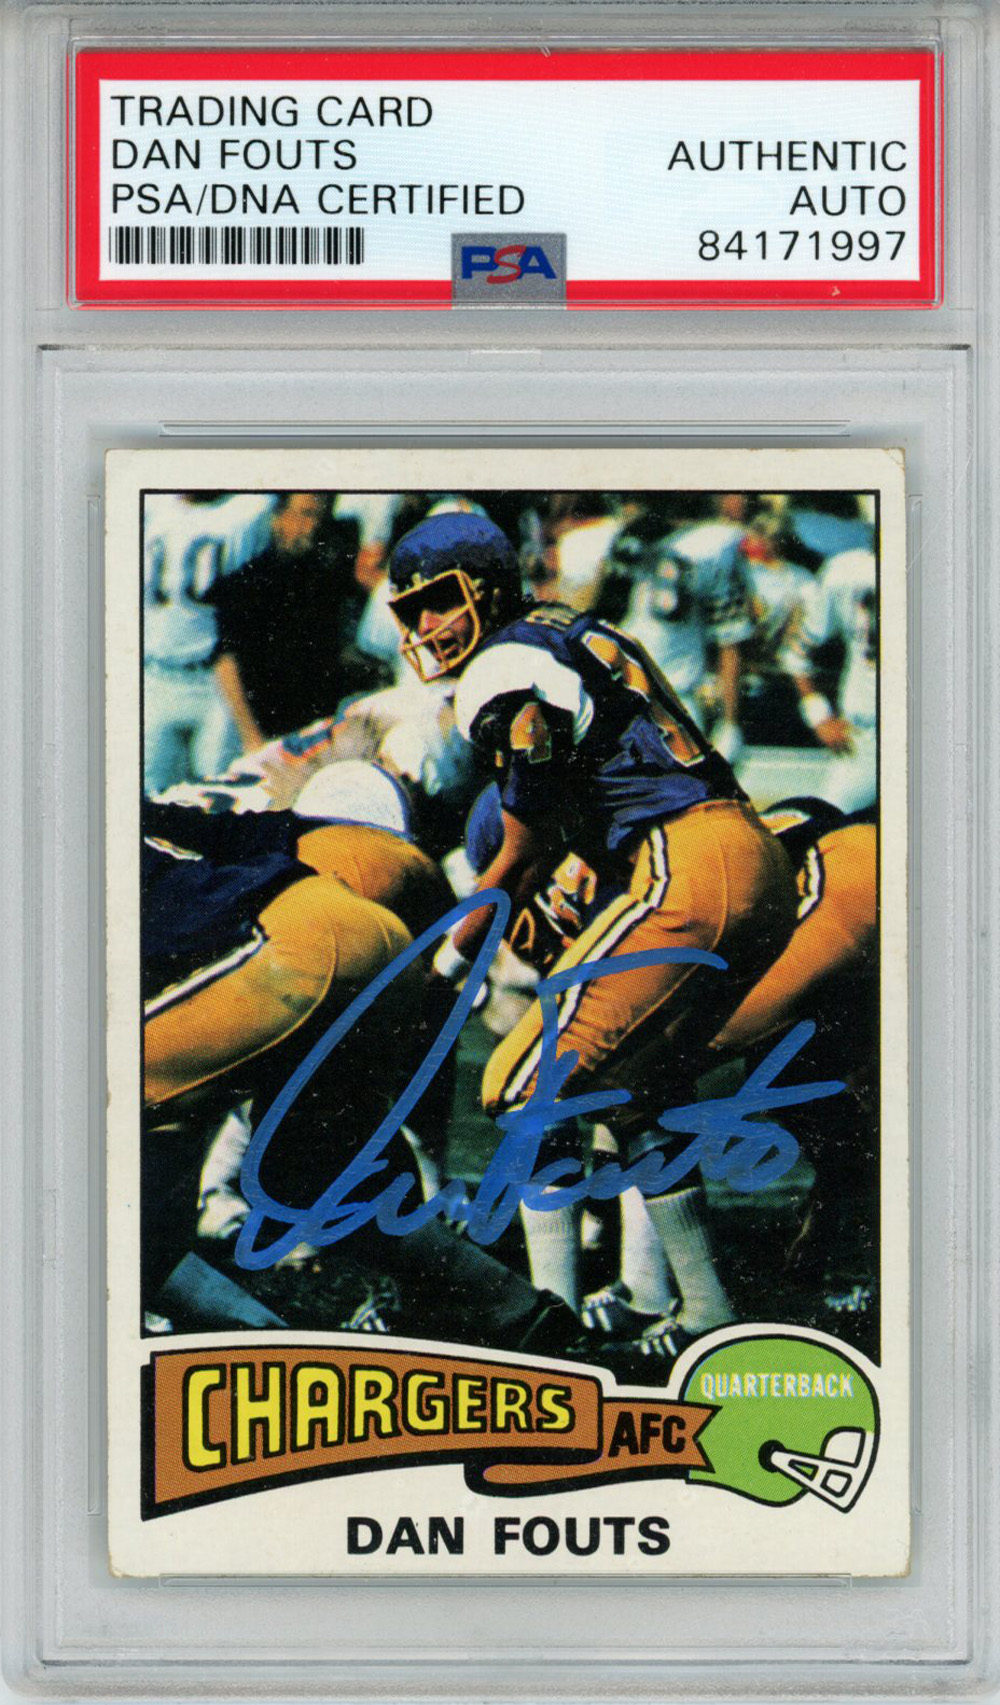 Dan Fouts Autographed 1975 Topps #367 Trading Card PSA Slab